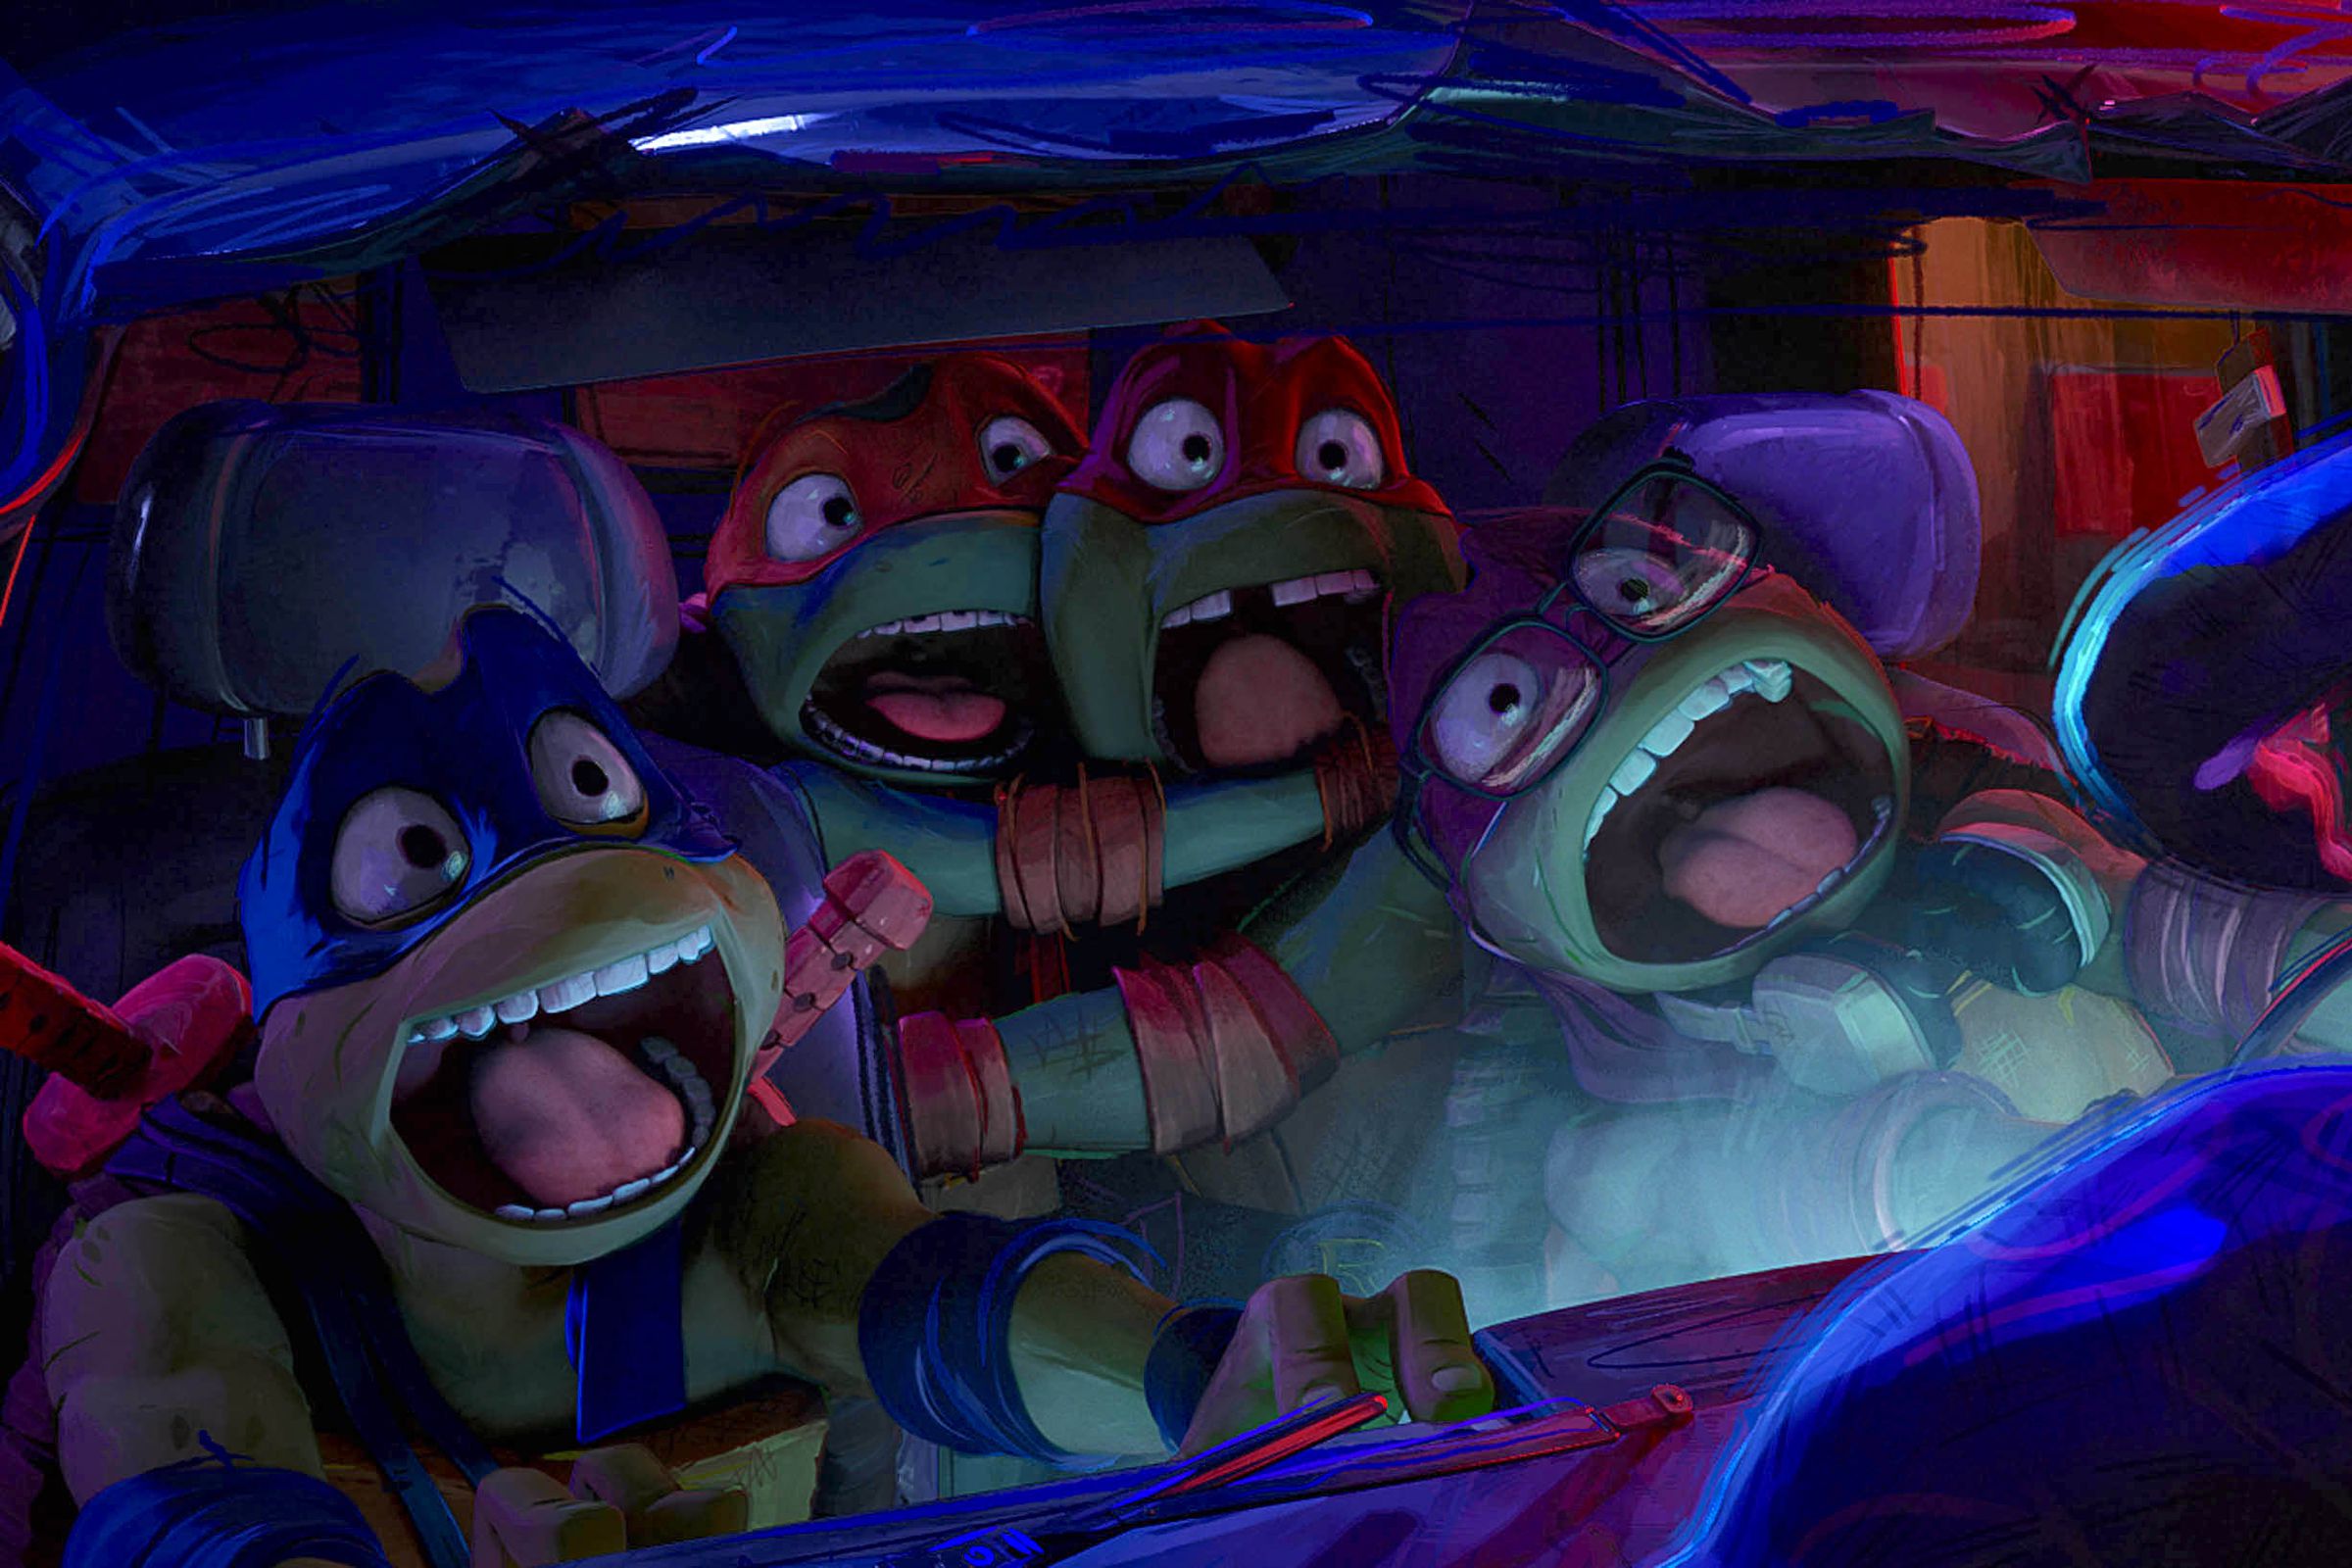 A group of screaming humanoid turtles wearing ninja masks squeezed together in a car.